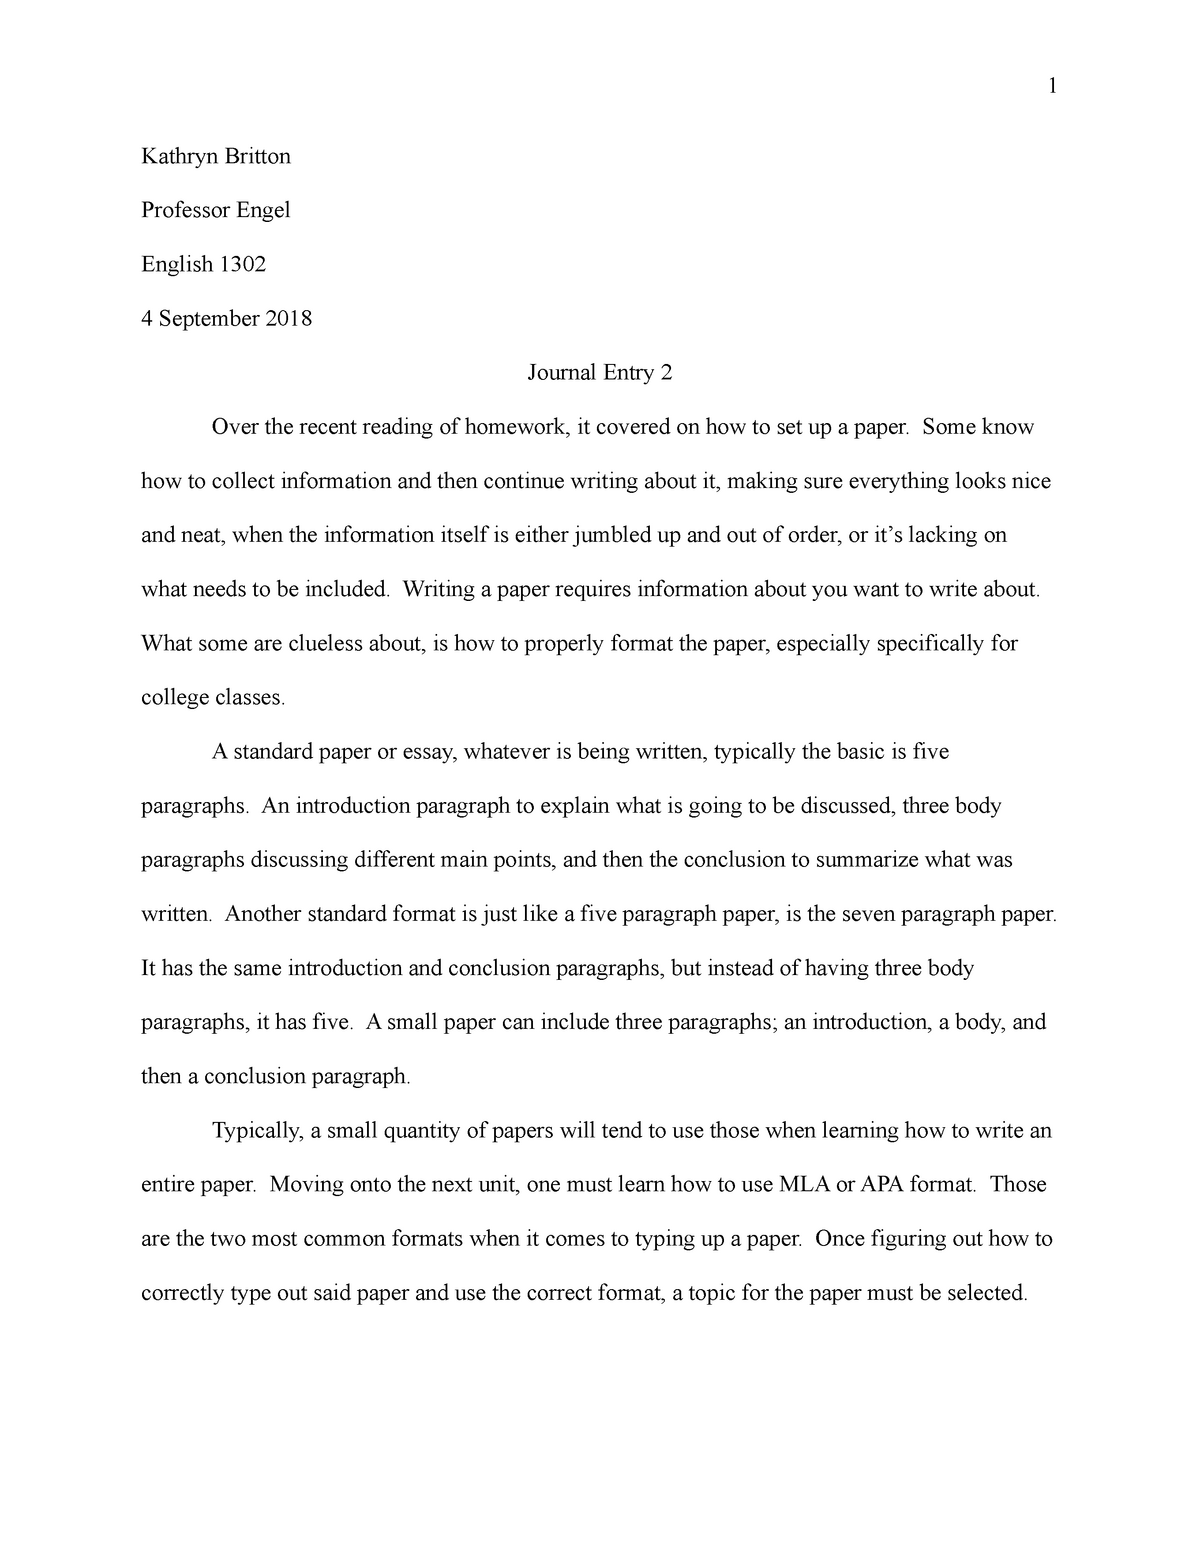 research paper about journal entry